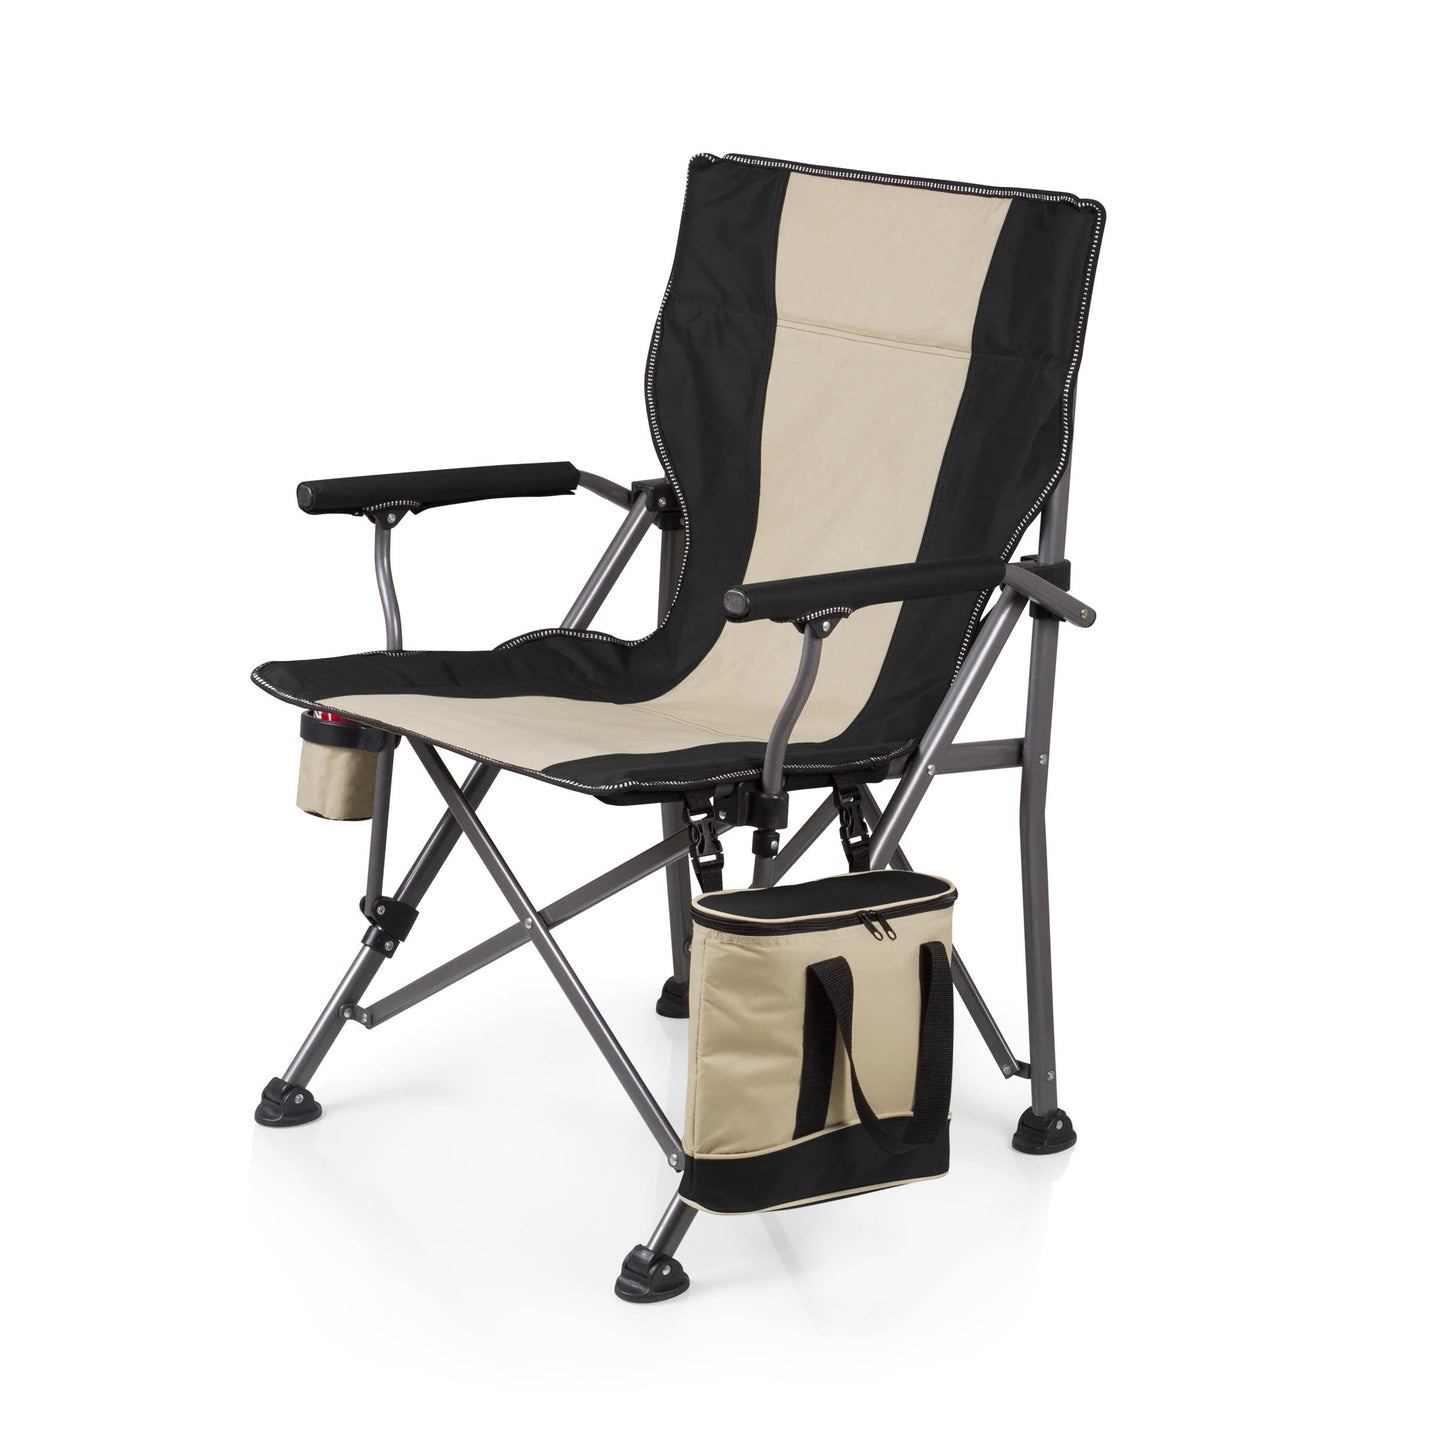 Detroit Lions - Outlander Folding Camping Chair with Cooler